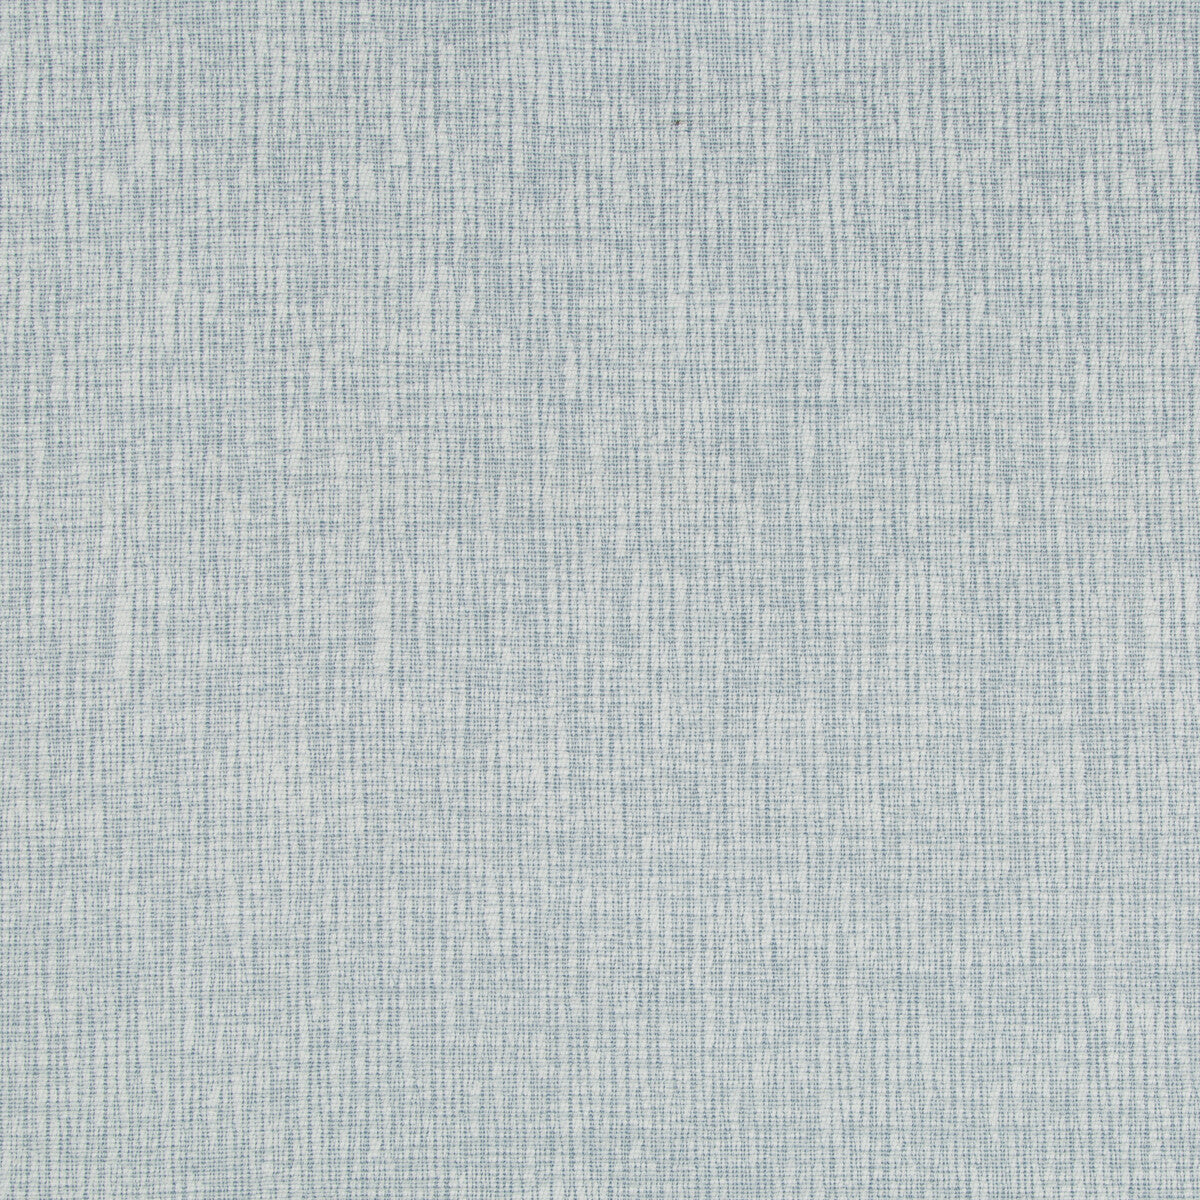 Mysto fabric in pacific color - pattern 35003.15.0 - by Kravet Basics in the Jeffrey Alan Marks Oceanview collection